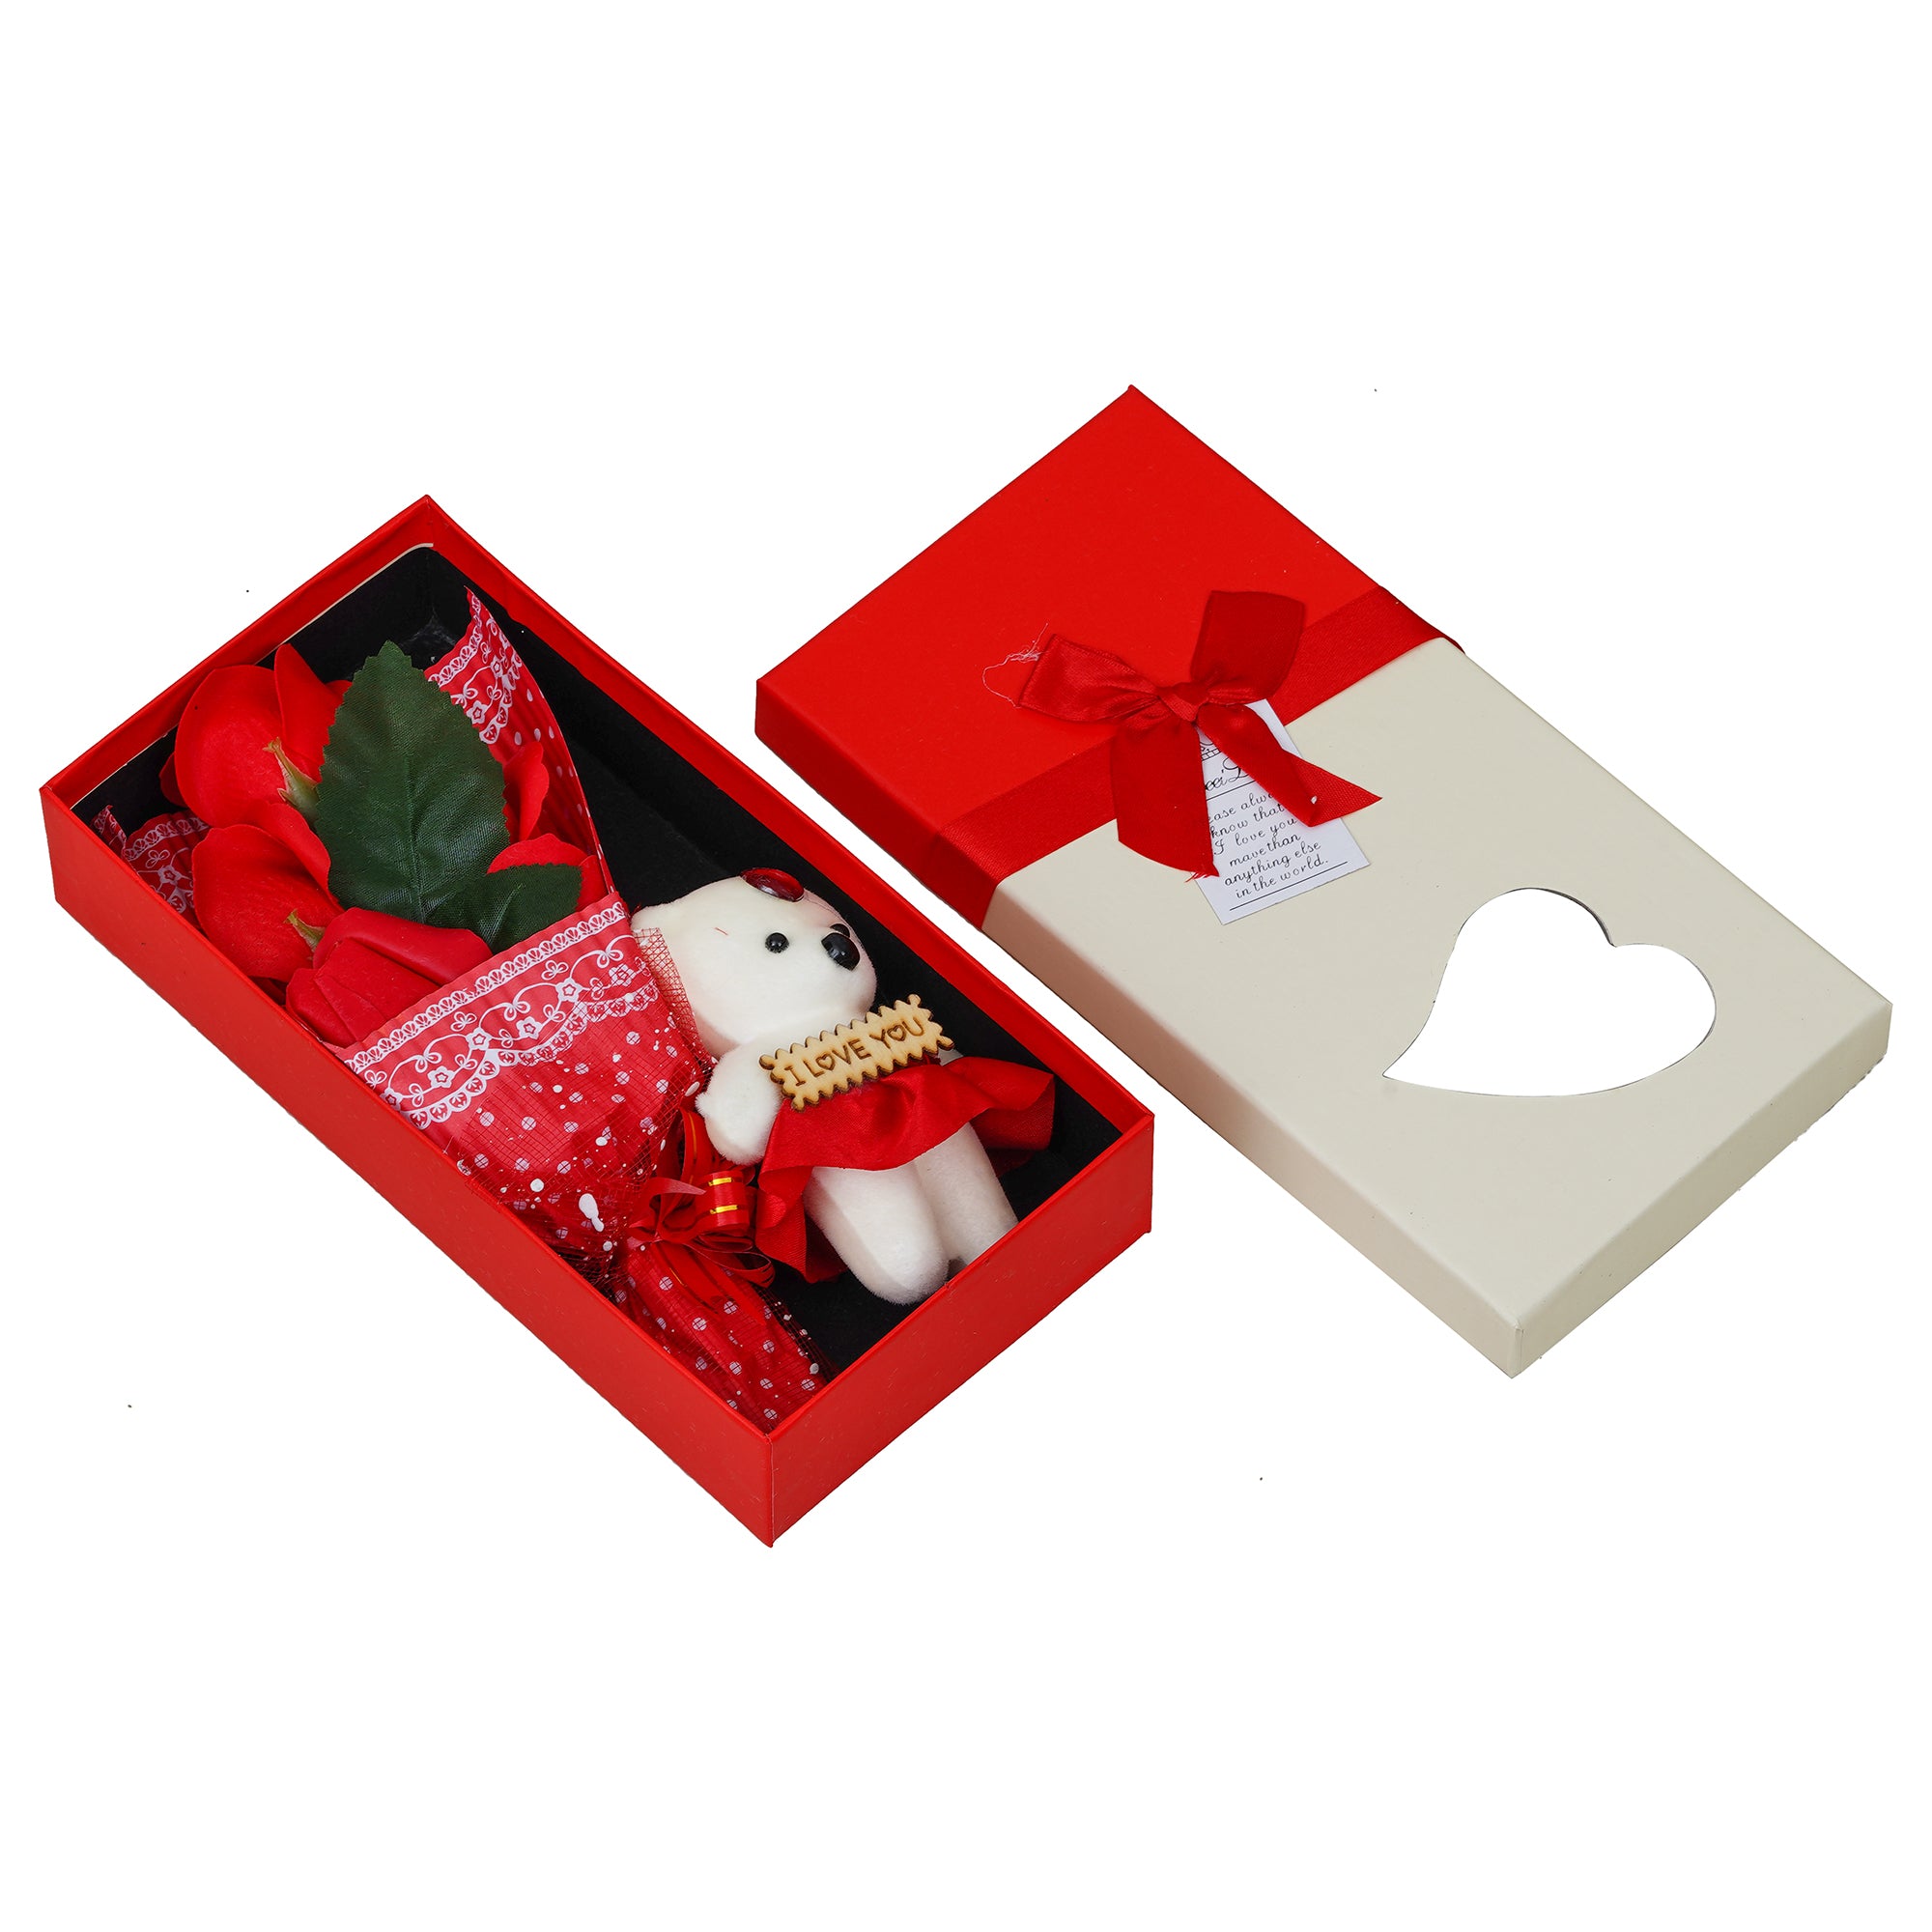 Red Roses Bouqet with White & Red Teddy Bear Valentine's Square Shaped Gift Box 3